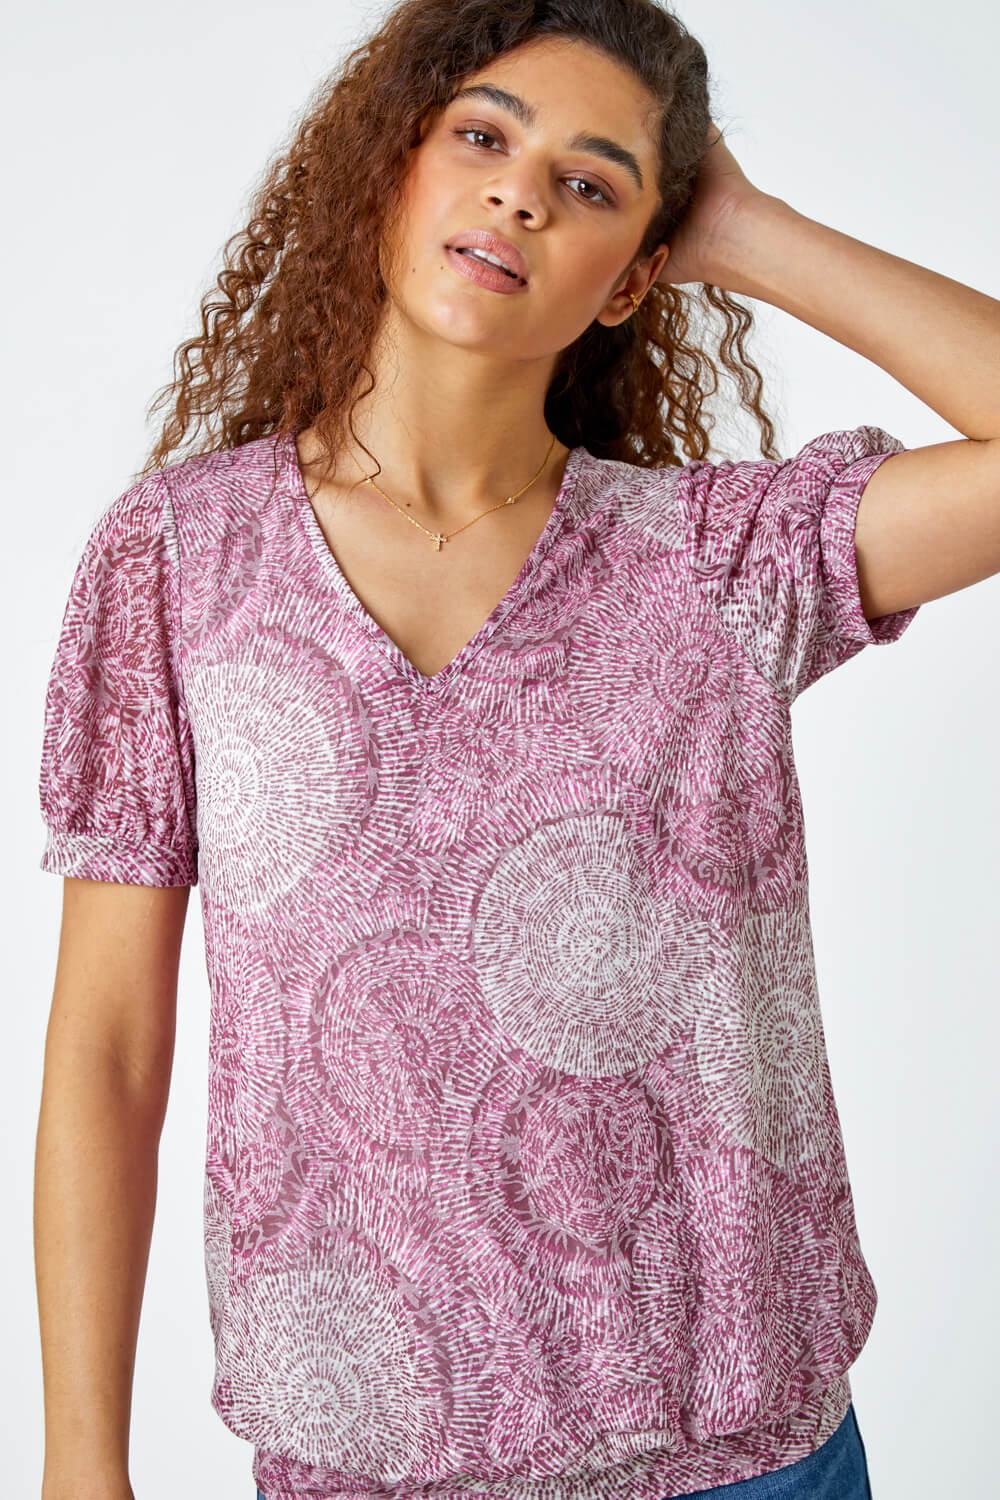 Maroon Abstract Circle Print Blouson Stretch Top, Image 2 of 5